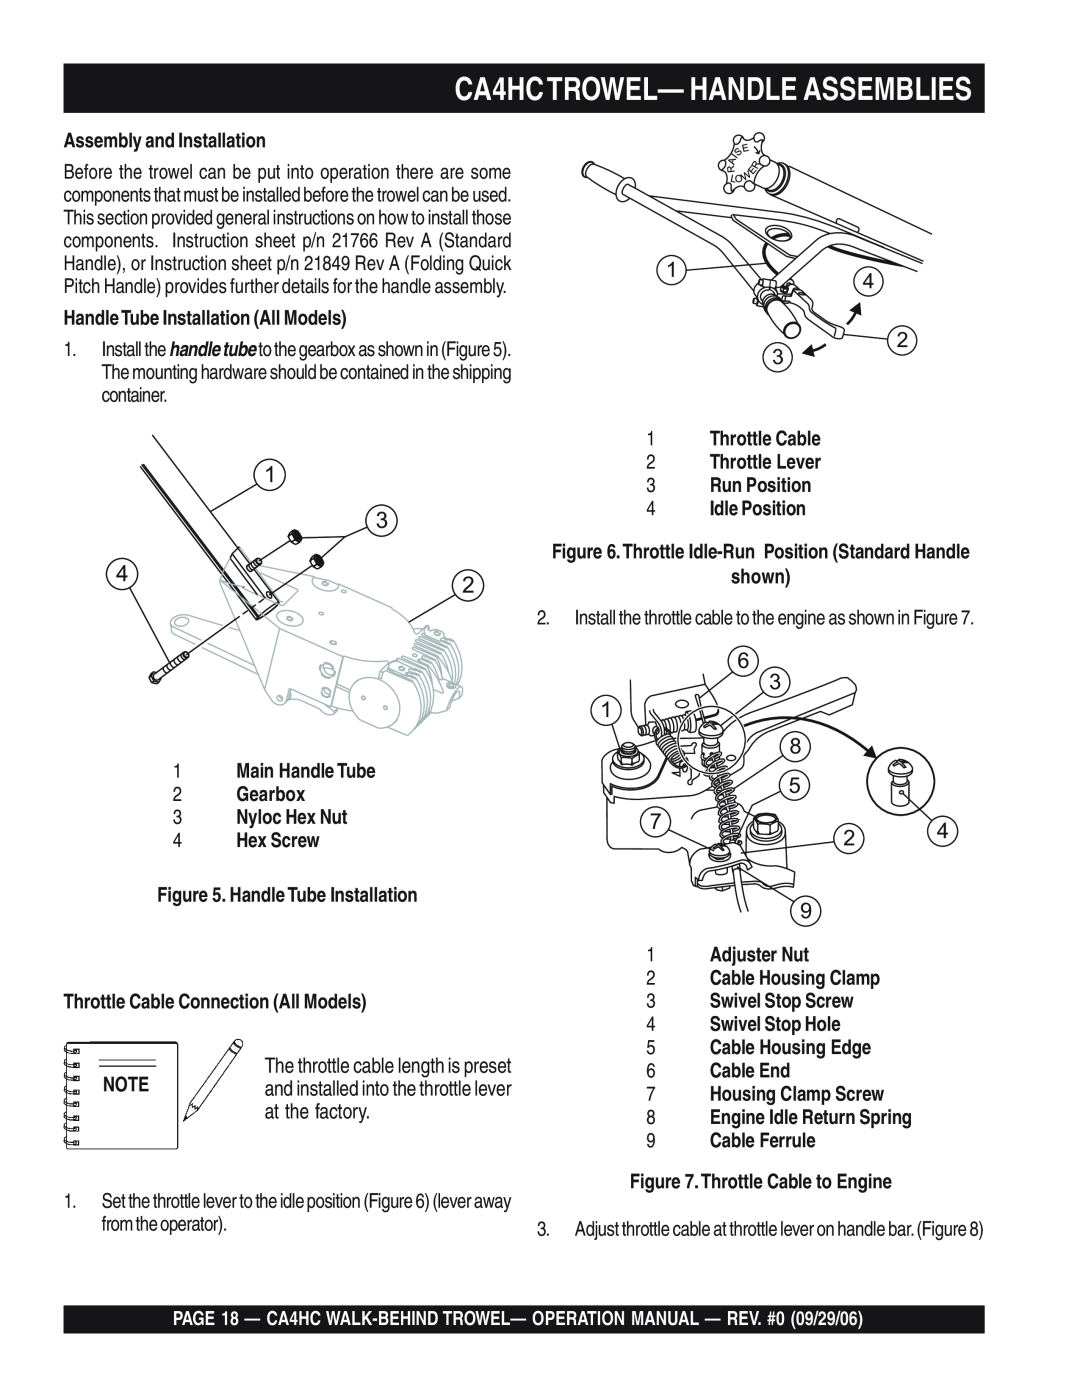 Multiquip operation manual CA4HCTROWEL— HANDLE ASSEMBLIES, The throttle cable length is preset 